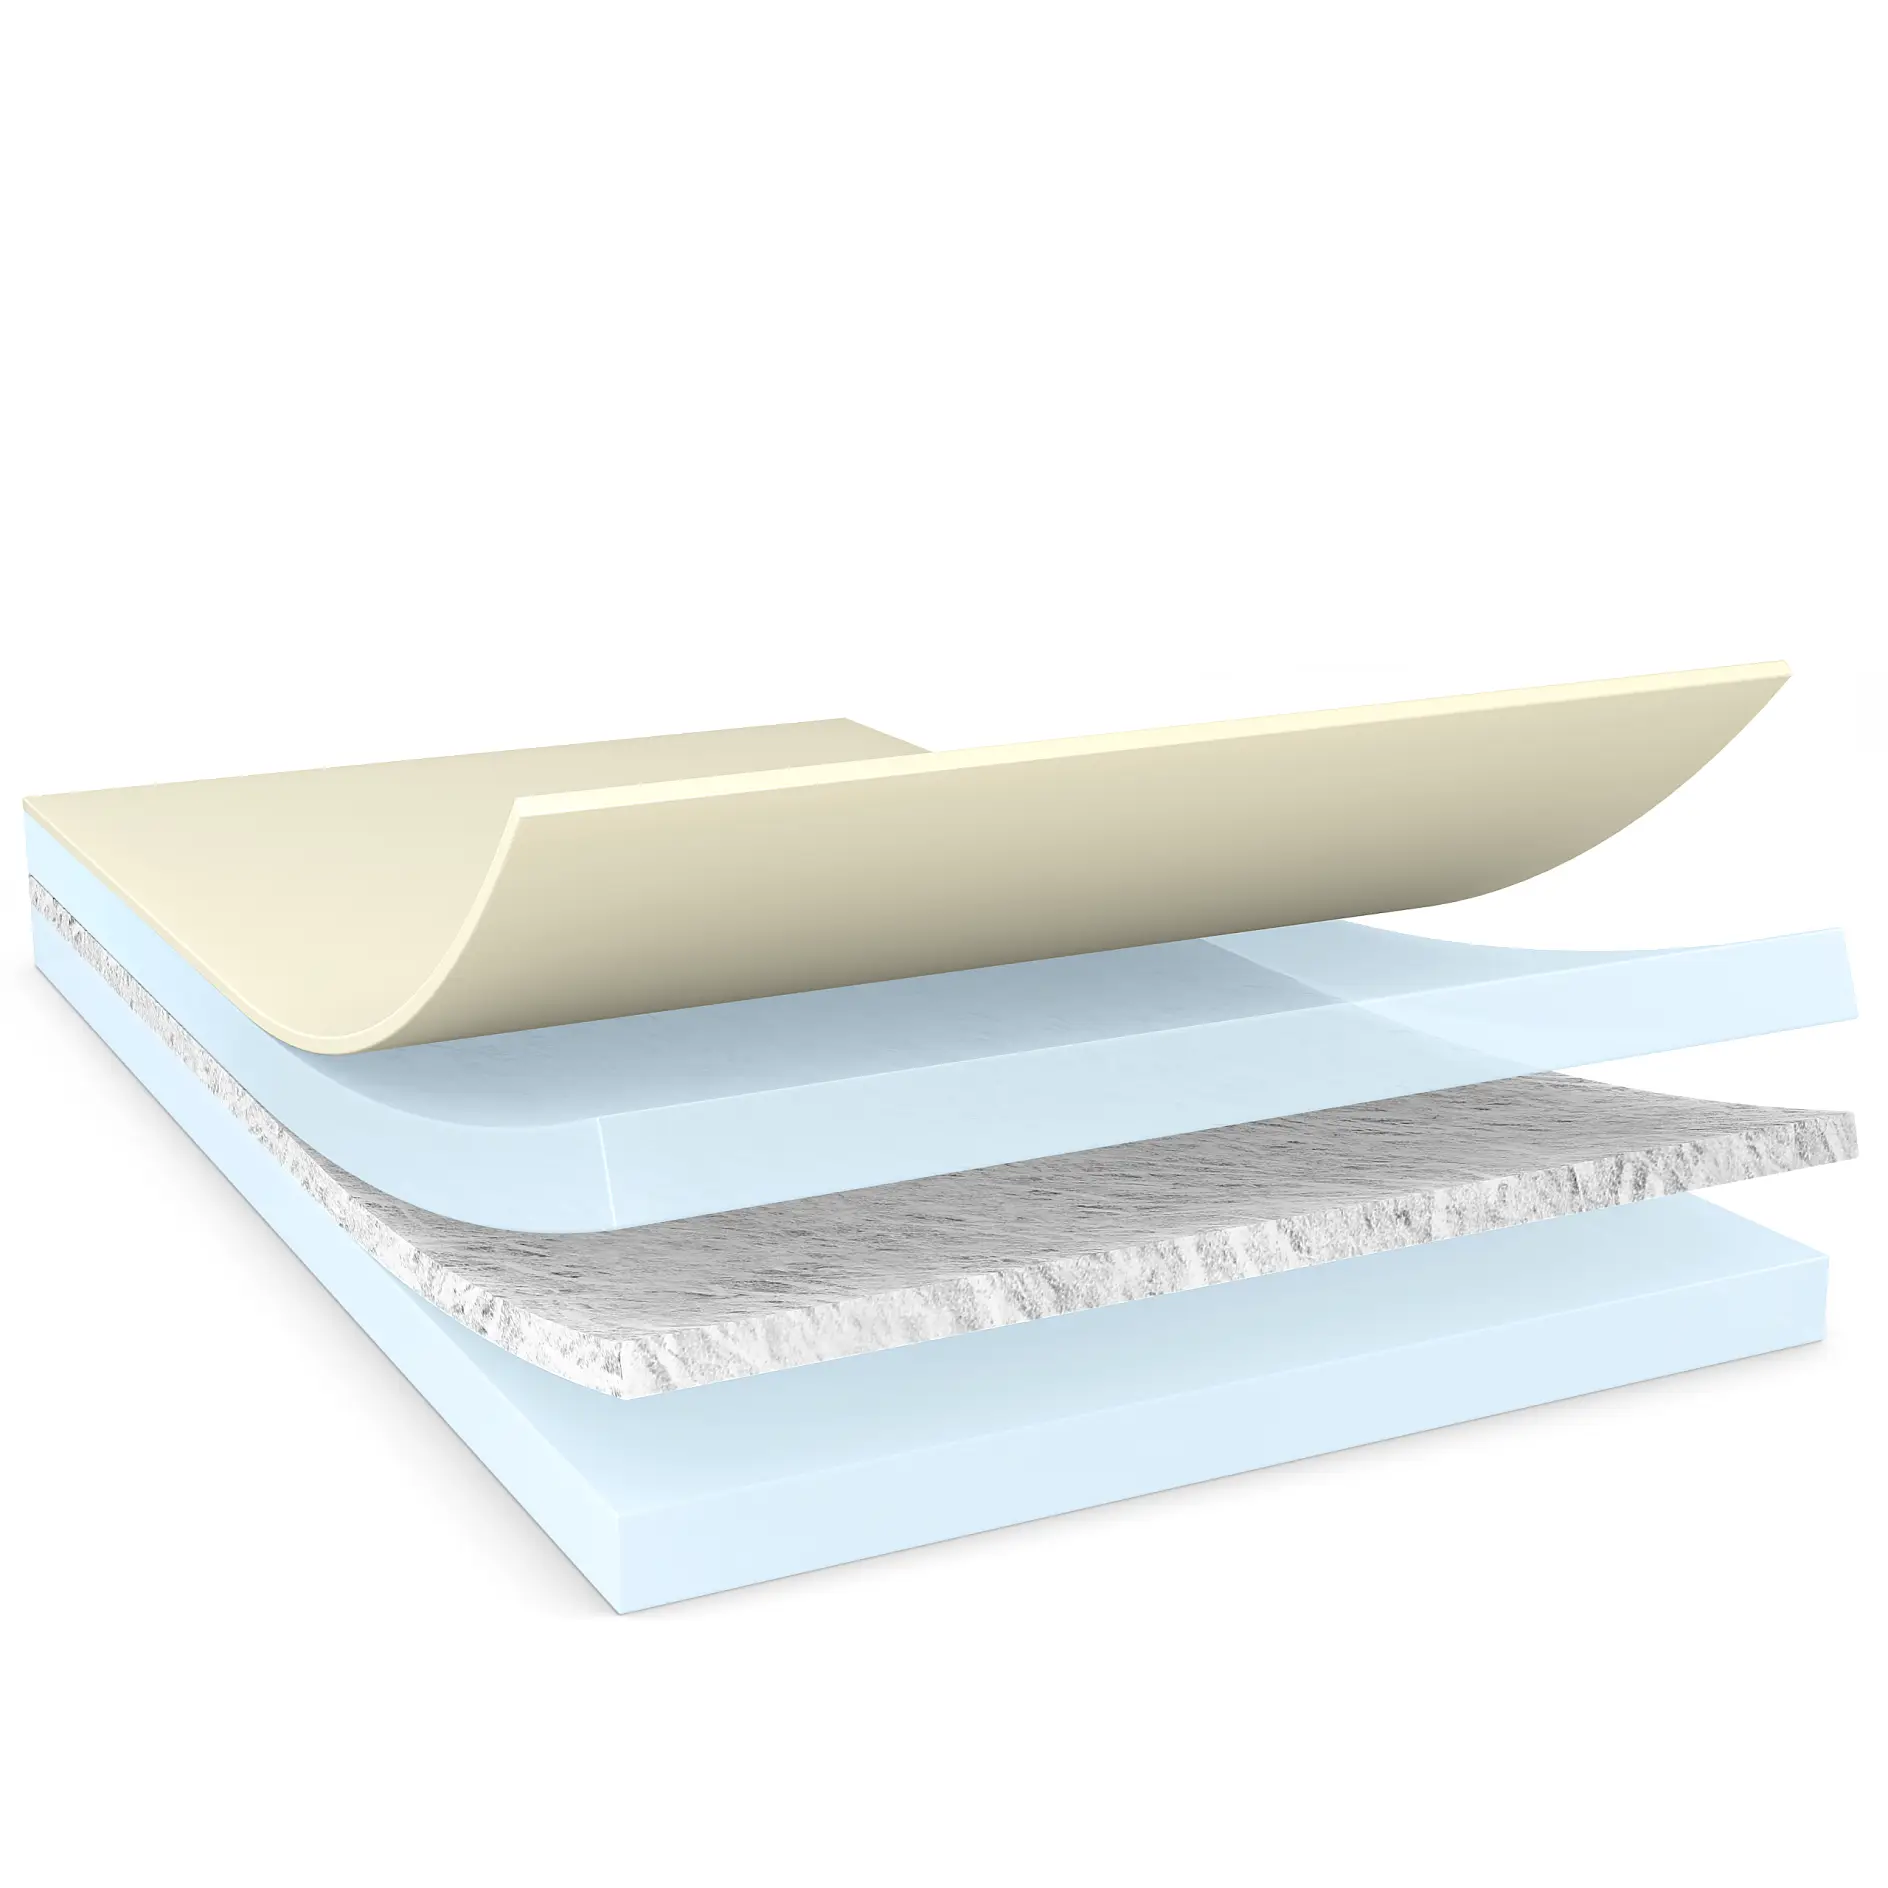 Product-Illustration_Double-Sided_Non-Woven_885x_300dpi.png